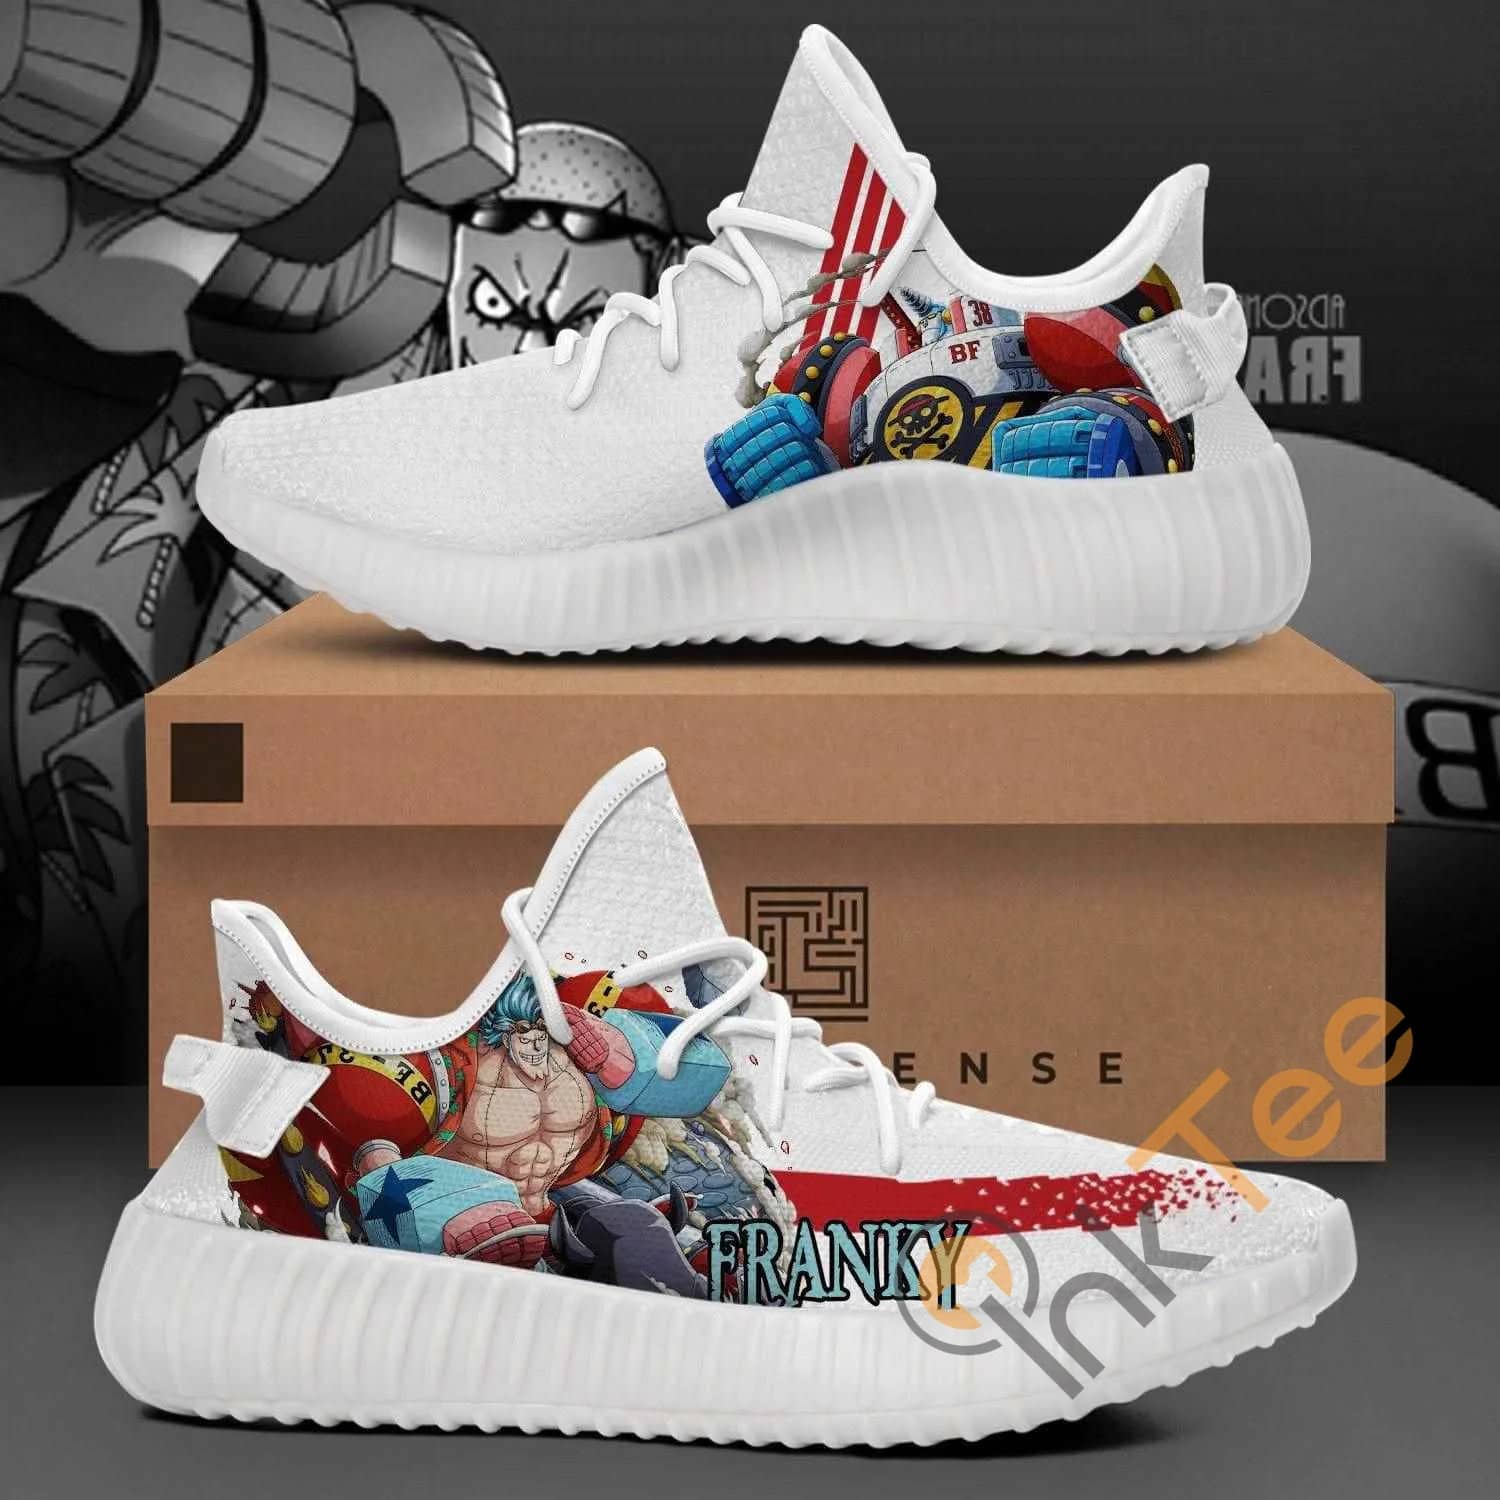 Franky Character One Piece Amazon Best Selling Yeezy Boost